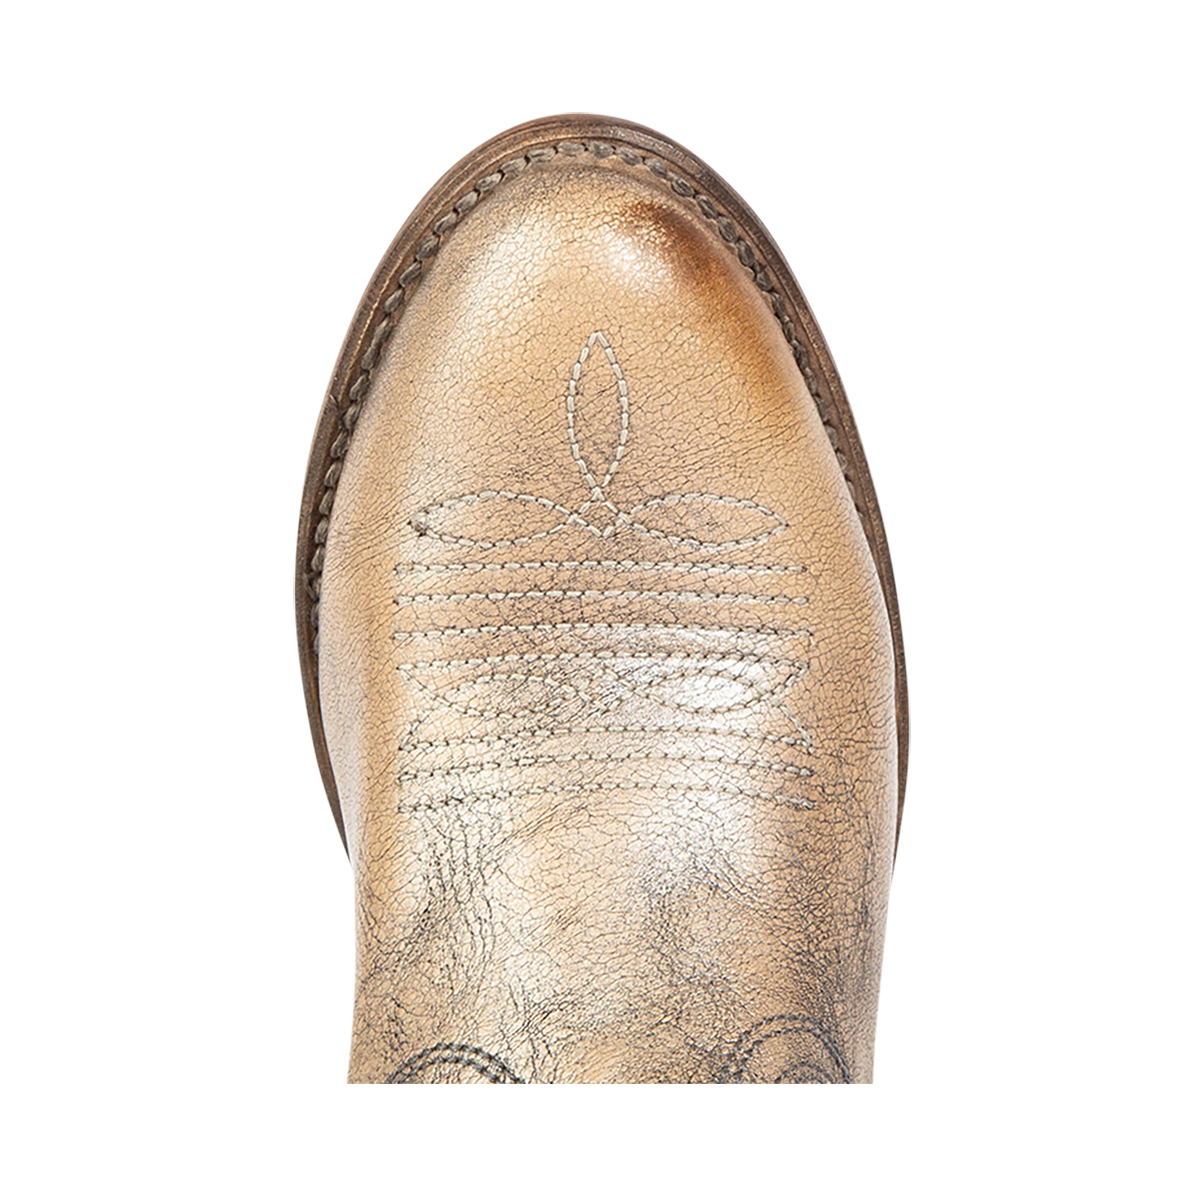 Top view showing almond toe with traditional stitching on FREEBIRD women's Whisper pewter  tall boot